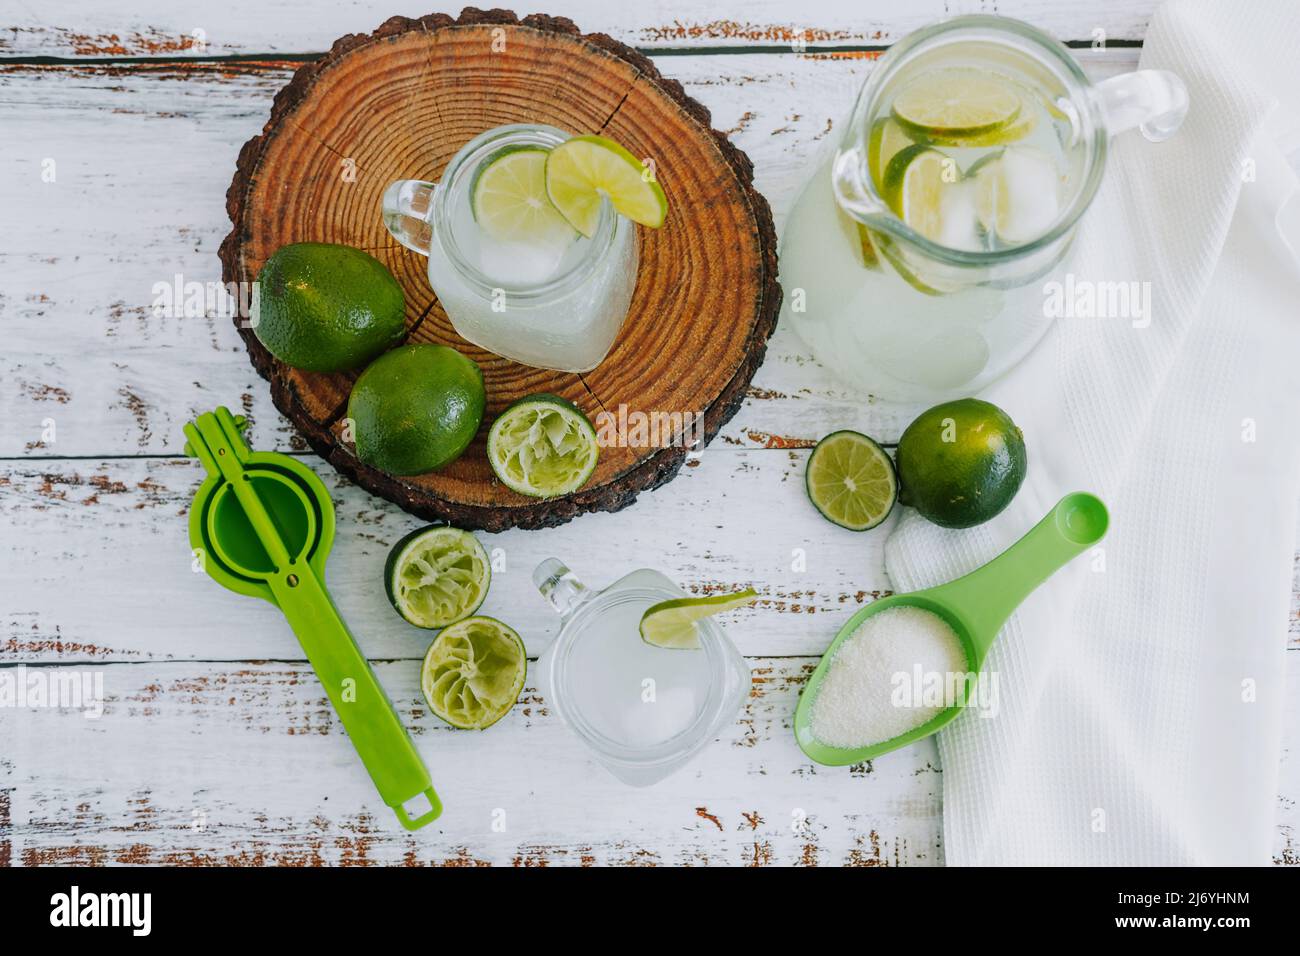 Jar glass of lemonade drink with green lemons or lime on a white background in Latin America Stock Photo